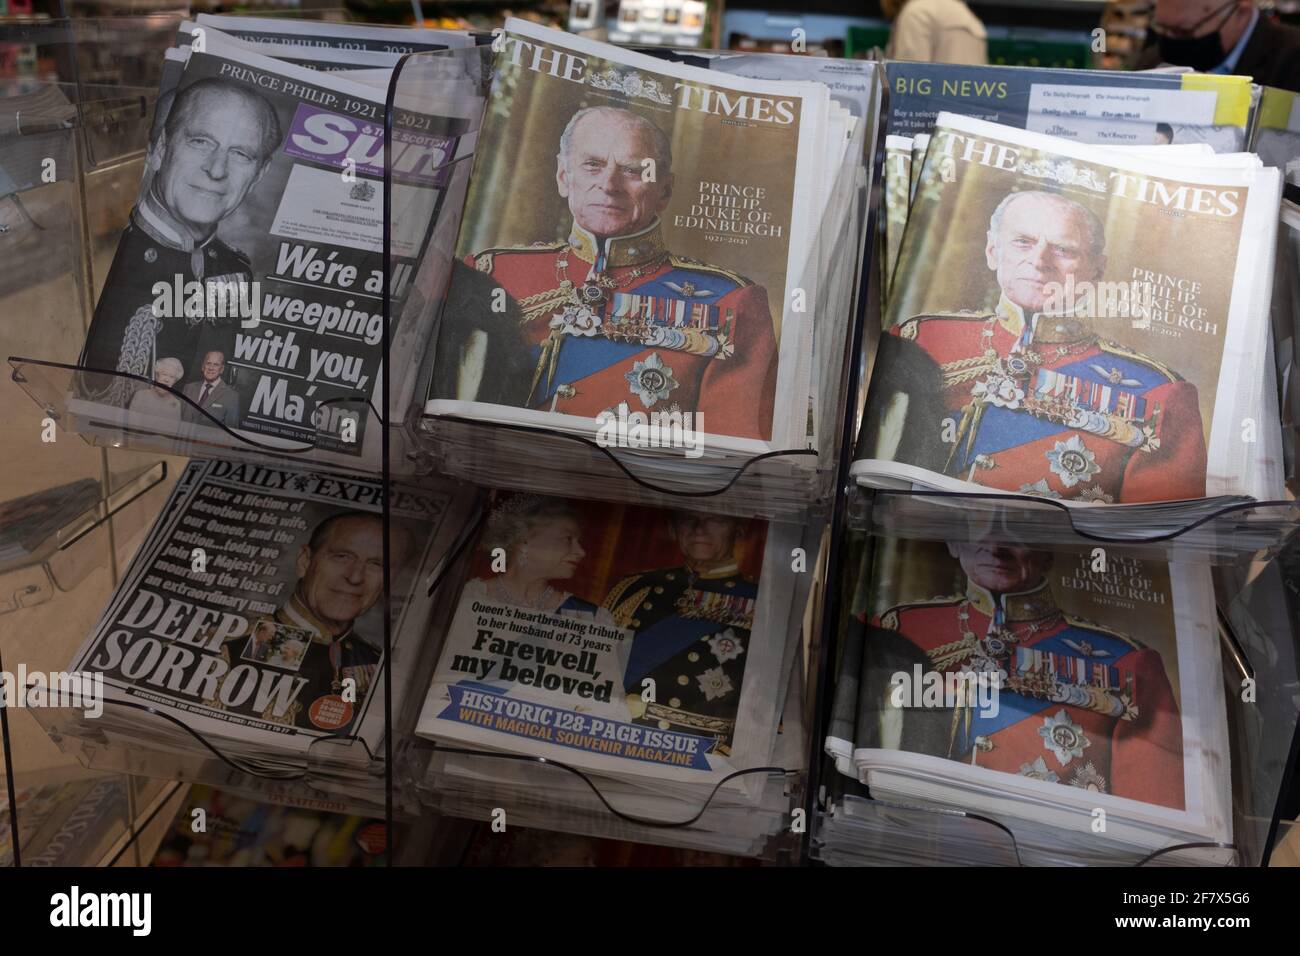 Glasgow, UK, 10th April 2021. A display of newspapers announcing the death of His Royal Highness Prince Philip, Duke of Edinburgh, at the age of 99-years. Photo credit: Jeremy Sutton-Hibbert/Alamy Live News Stock Photo